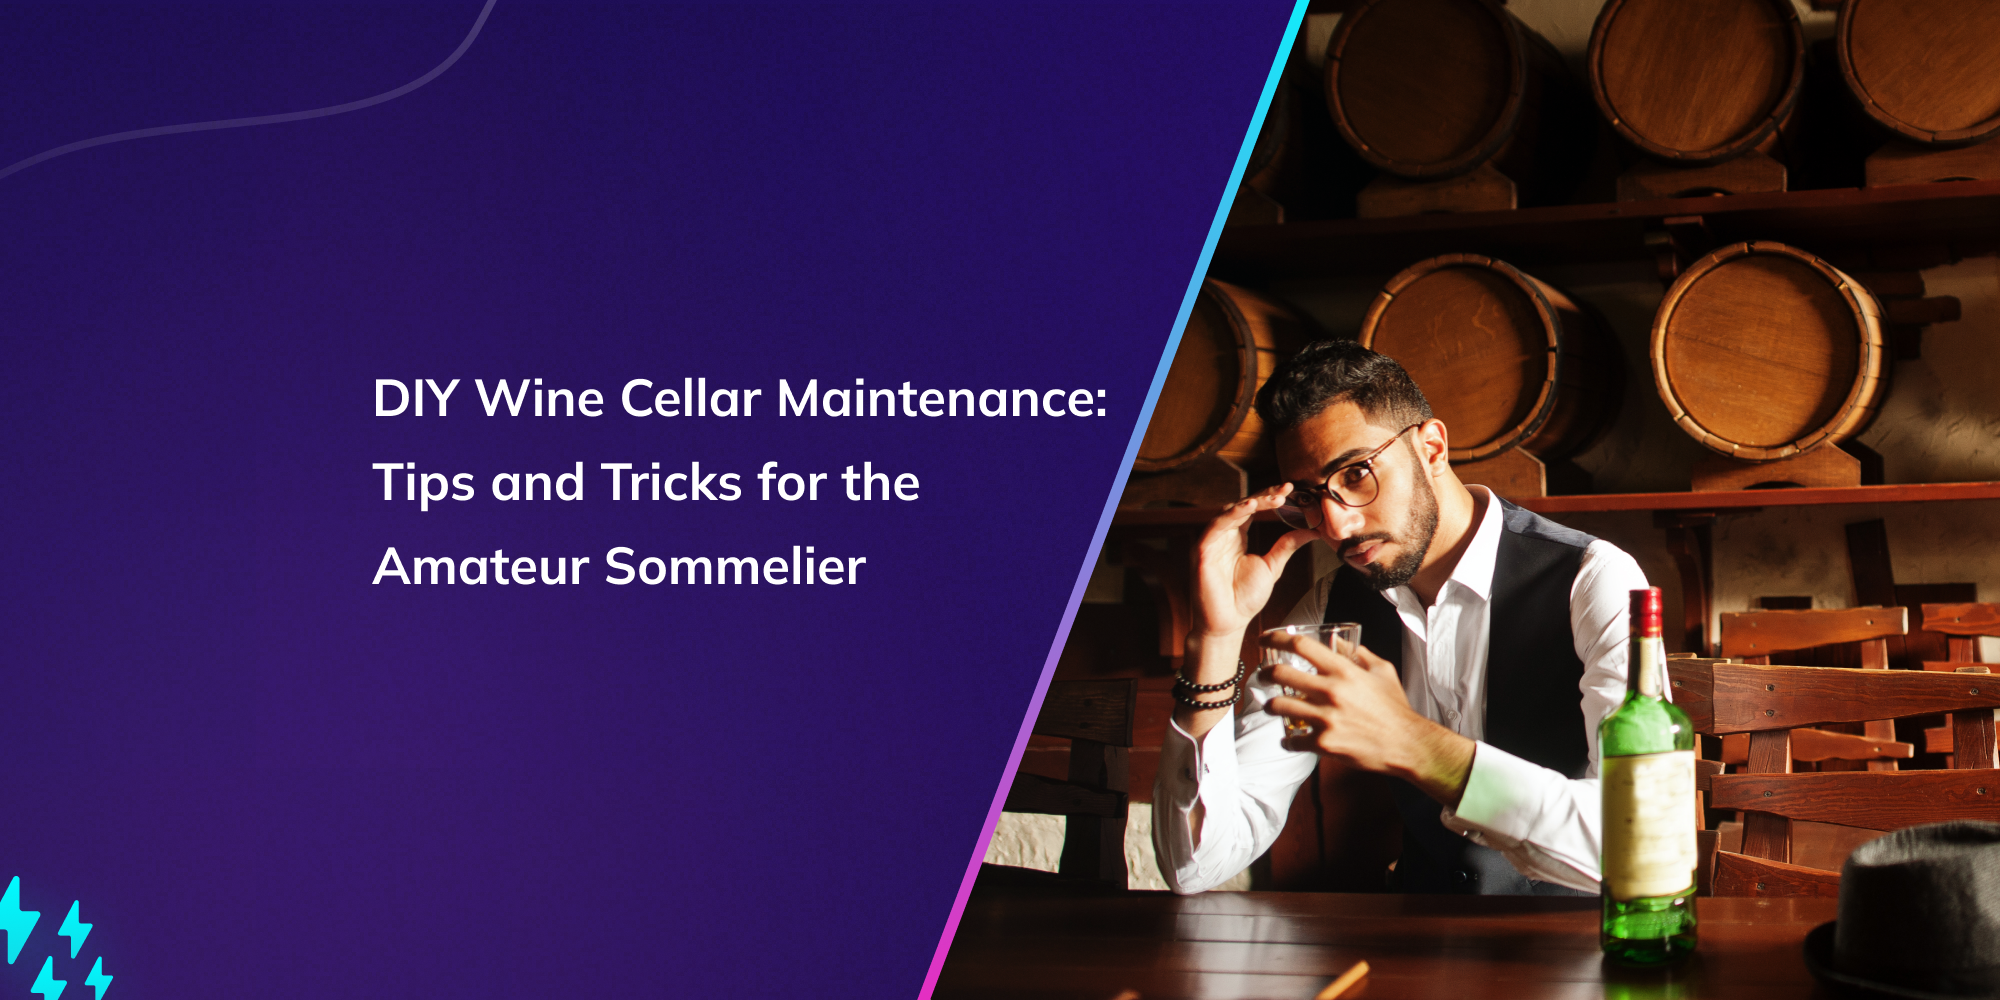 DIY Wine Cellar Maintenance: Tips and Tricks for the Amateur Sommelier